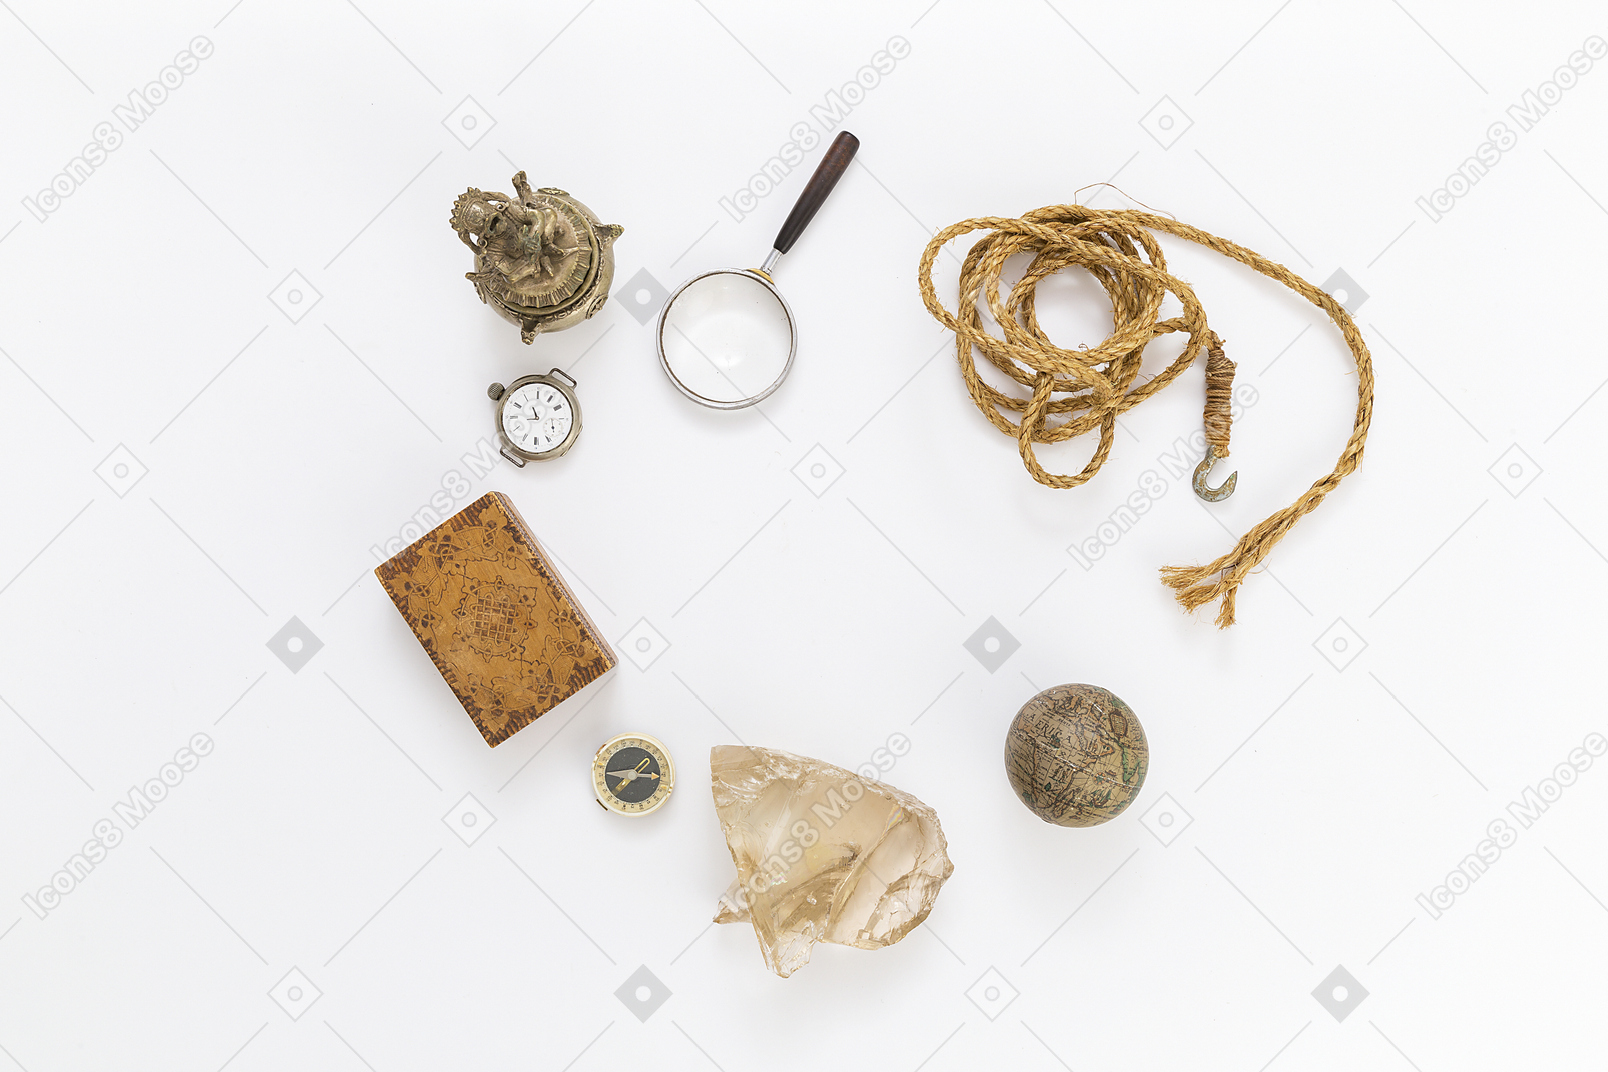 Mini box, magnifying glass, pocket watch, compass and piece of mineral